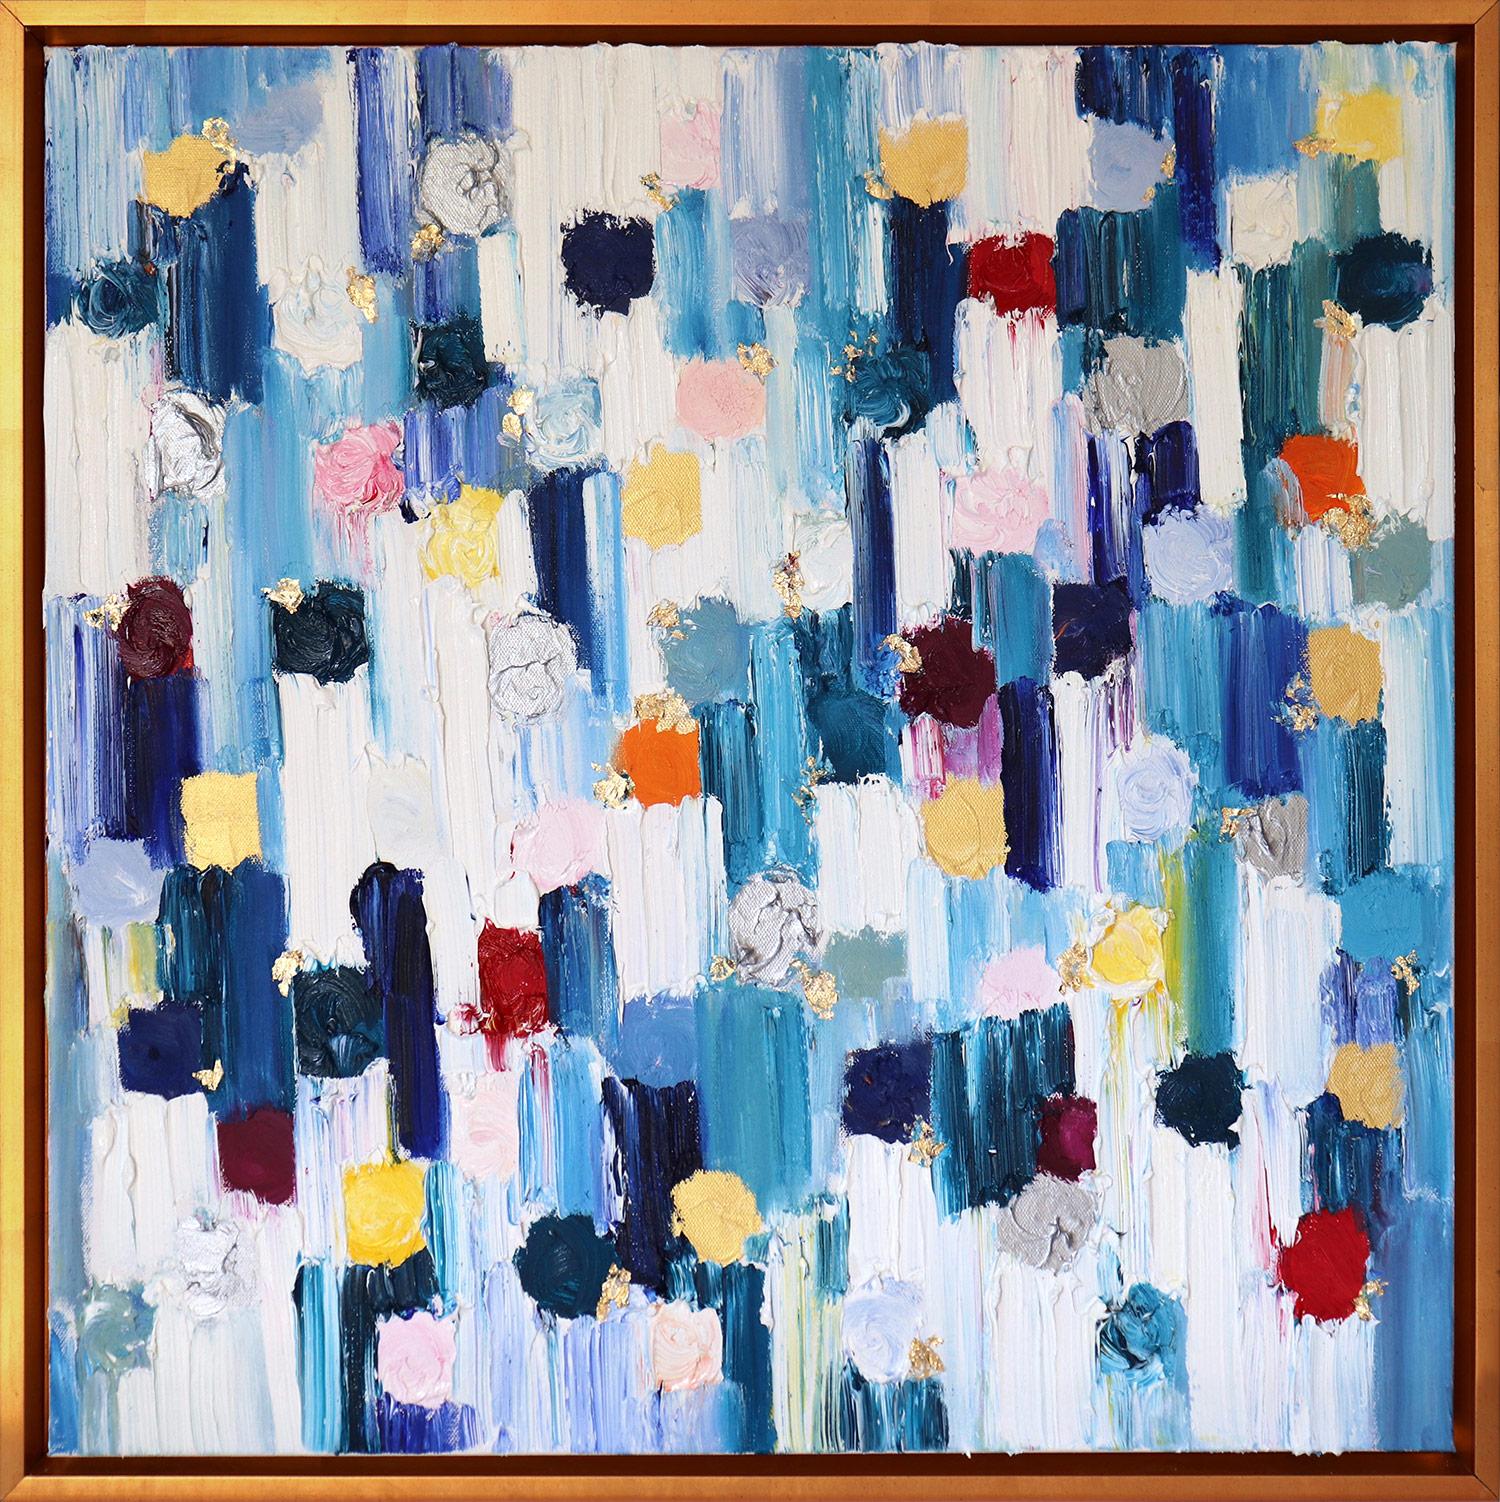 Cindy Shaoul Abstract Painting - "Dripping Dots - St. Tropez" Colorful Abstract Oil Painting on Canvas Framed